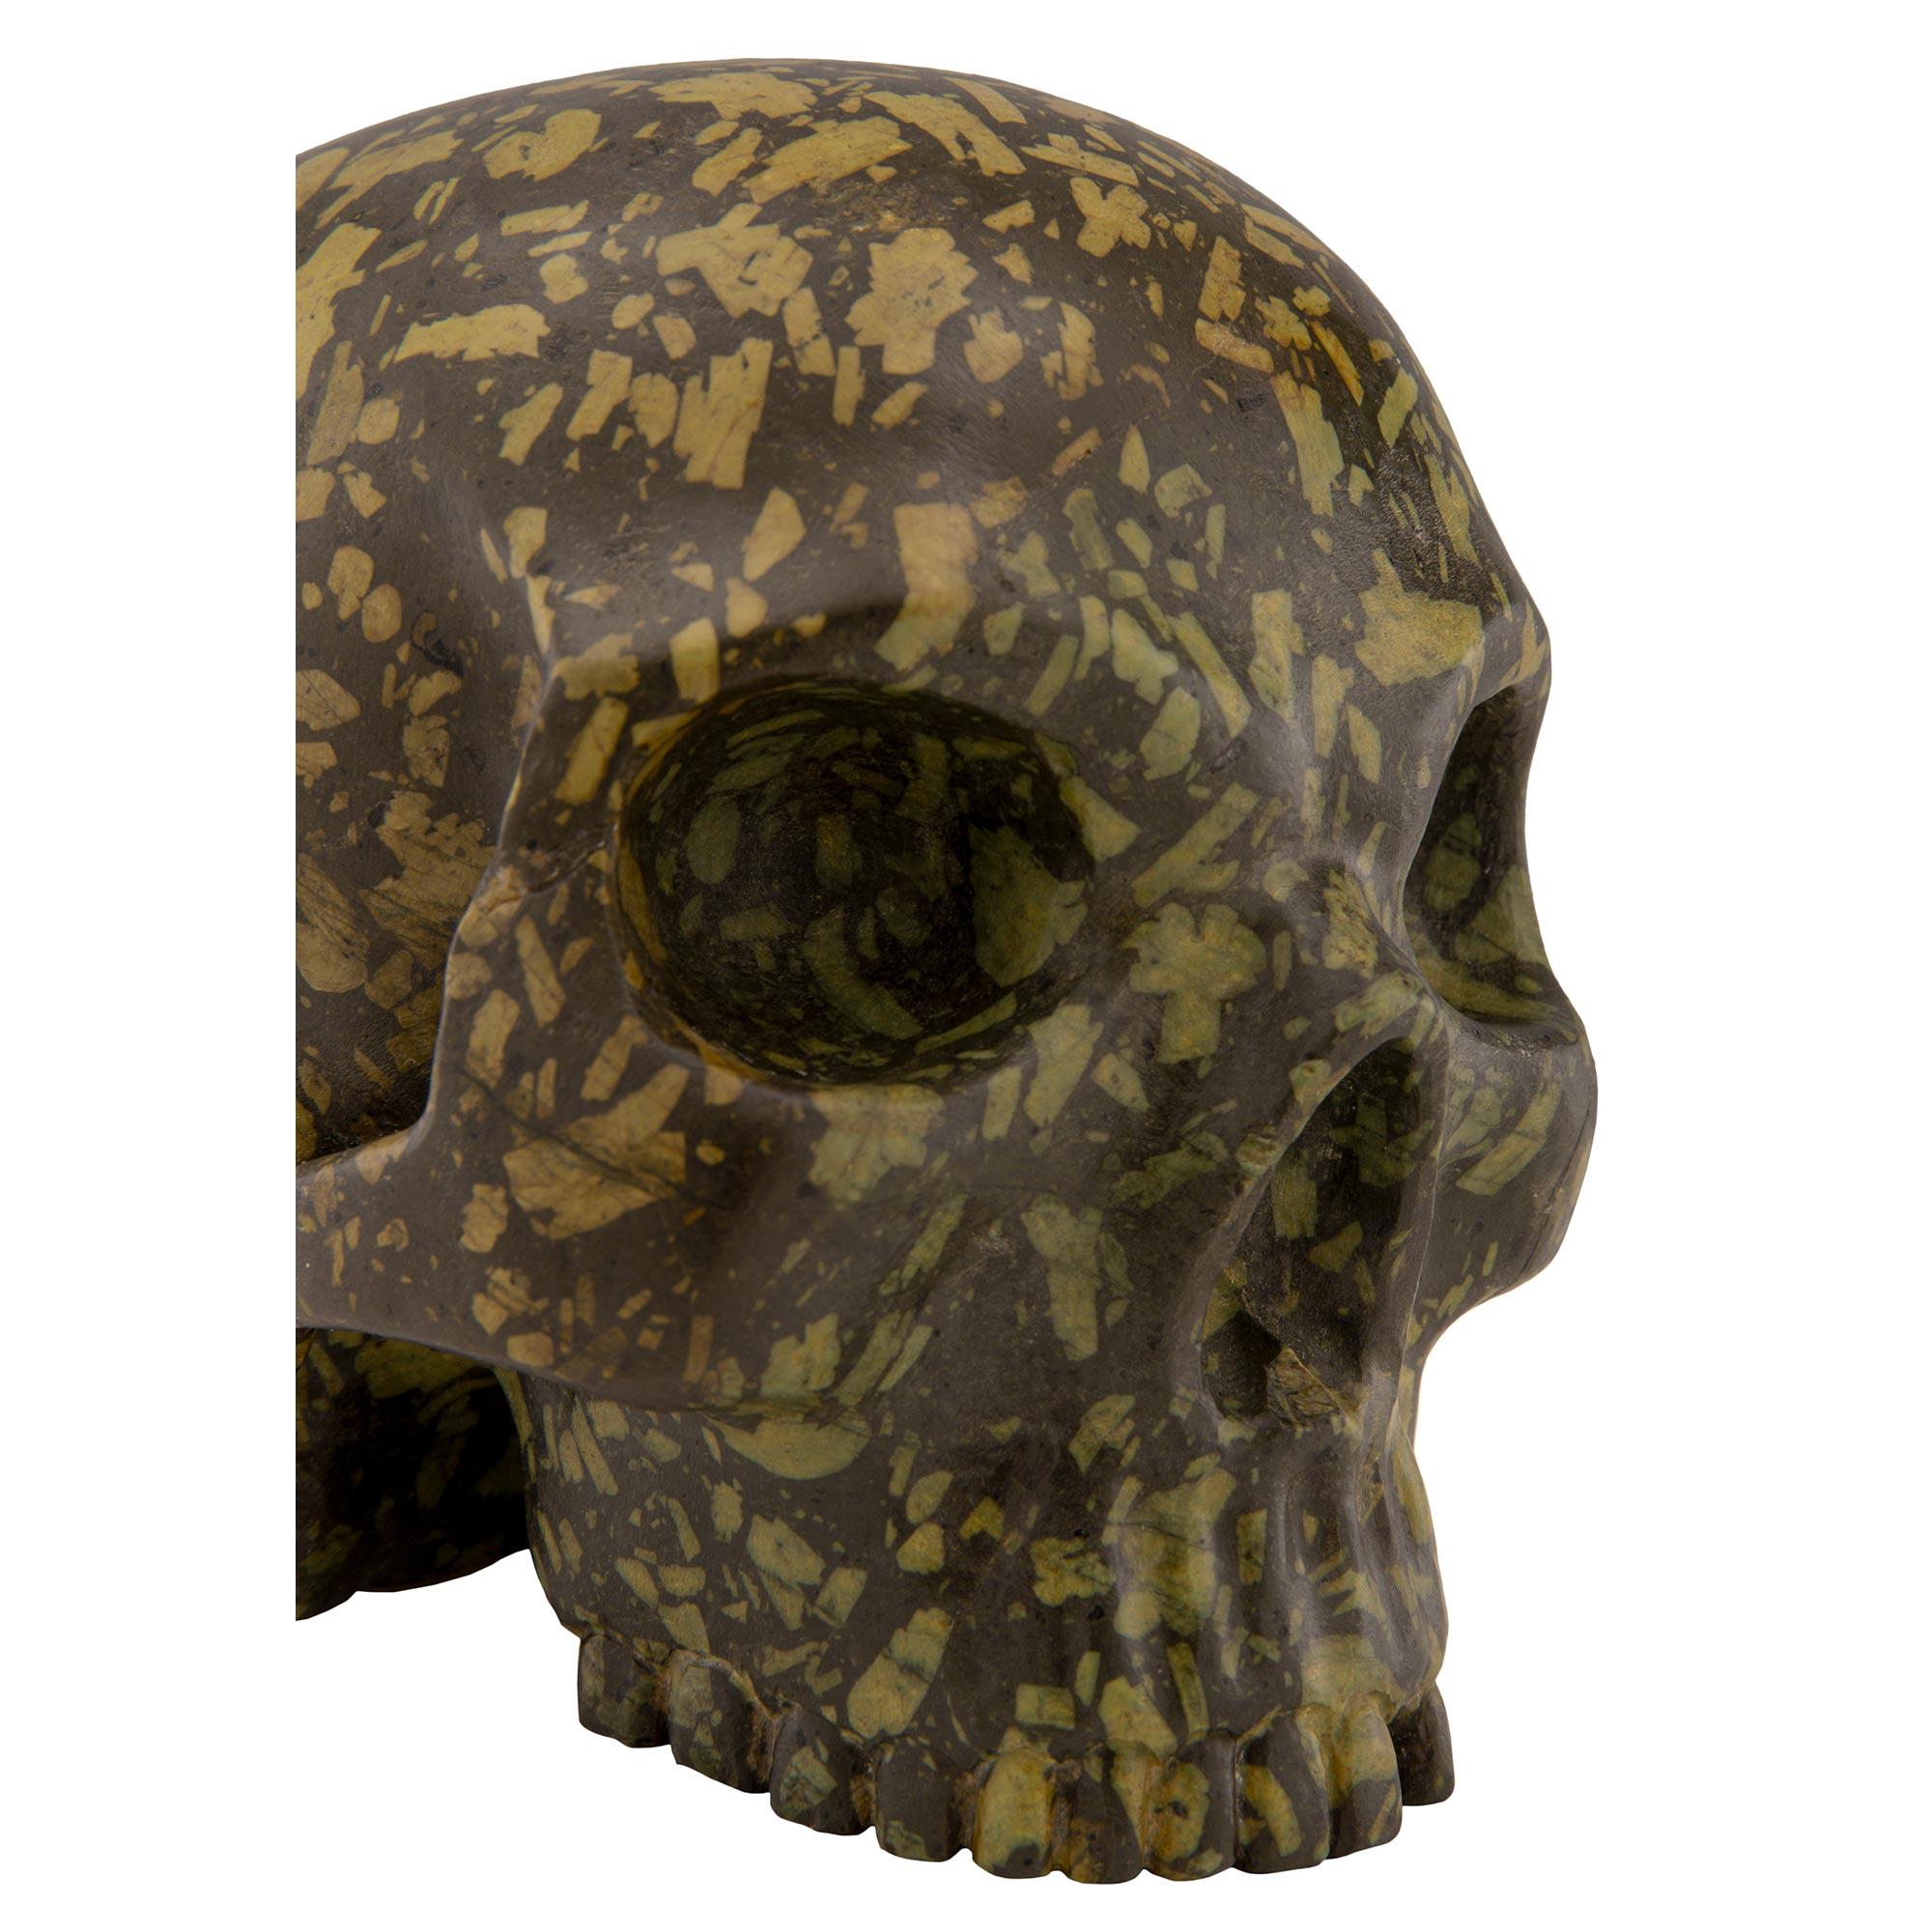 Italian 19th Century Green Porphyry Skull Statue/Paperweight For Sale 2